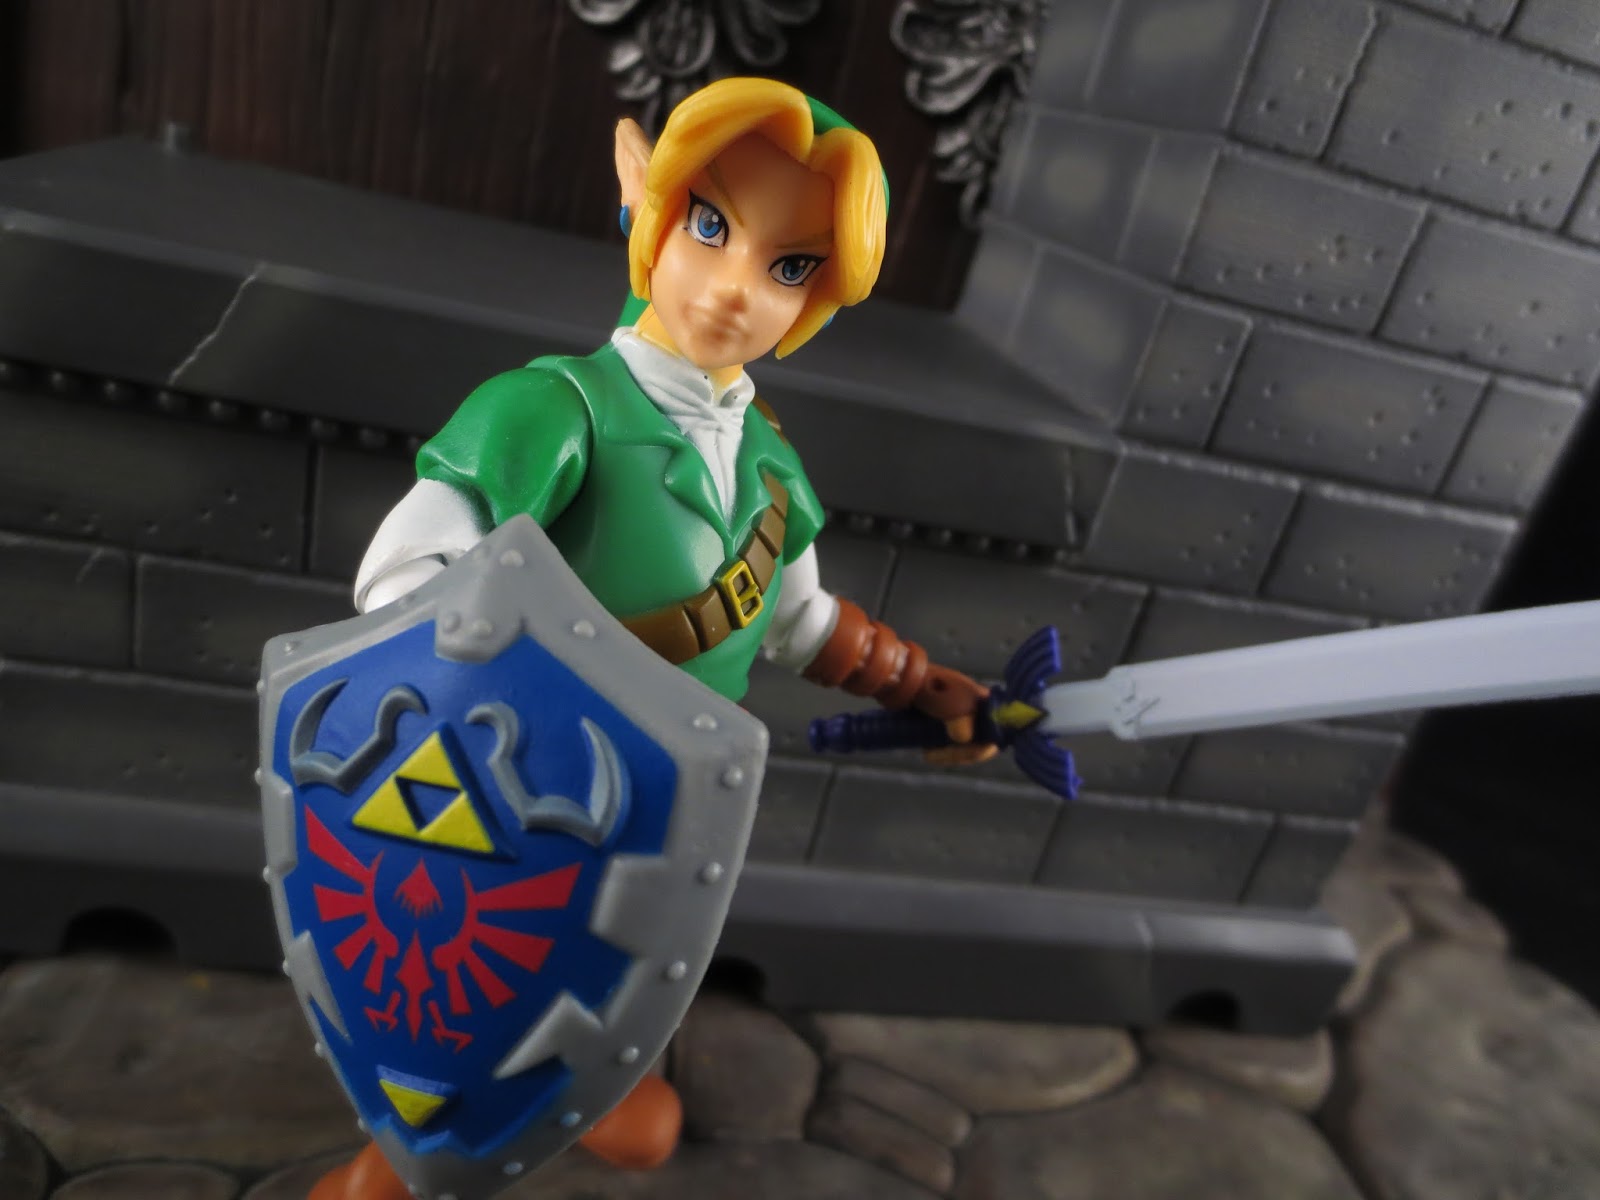 link action figure ocarina of time